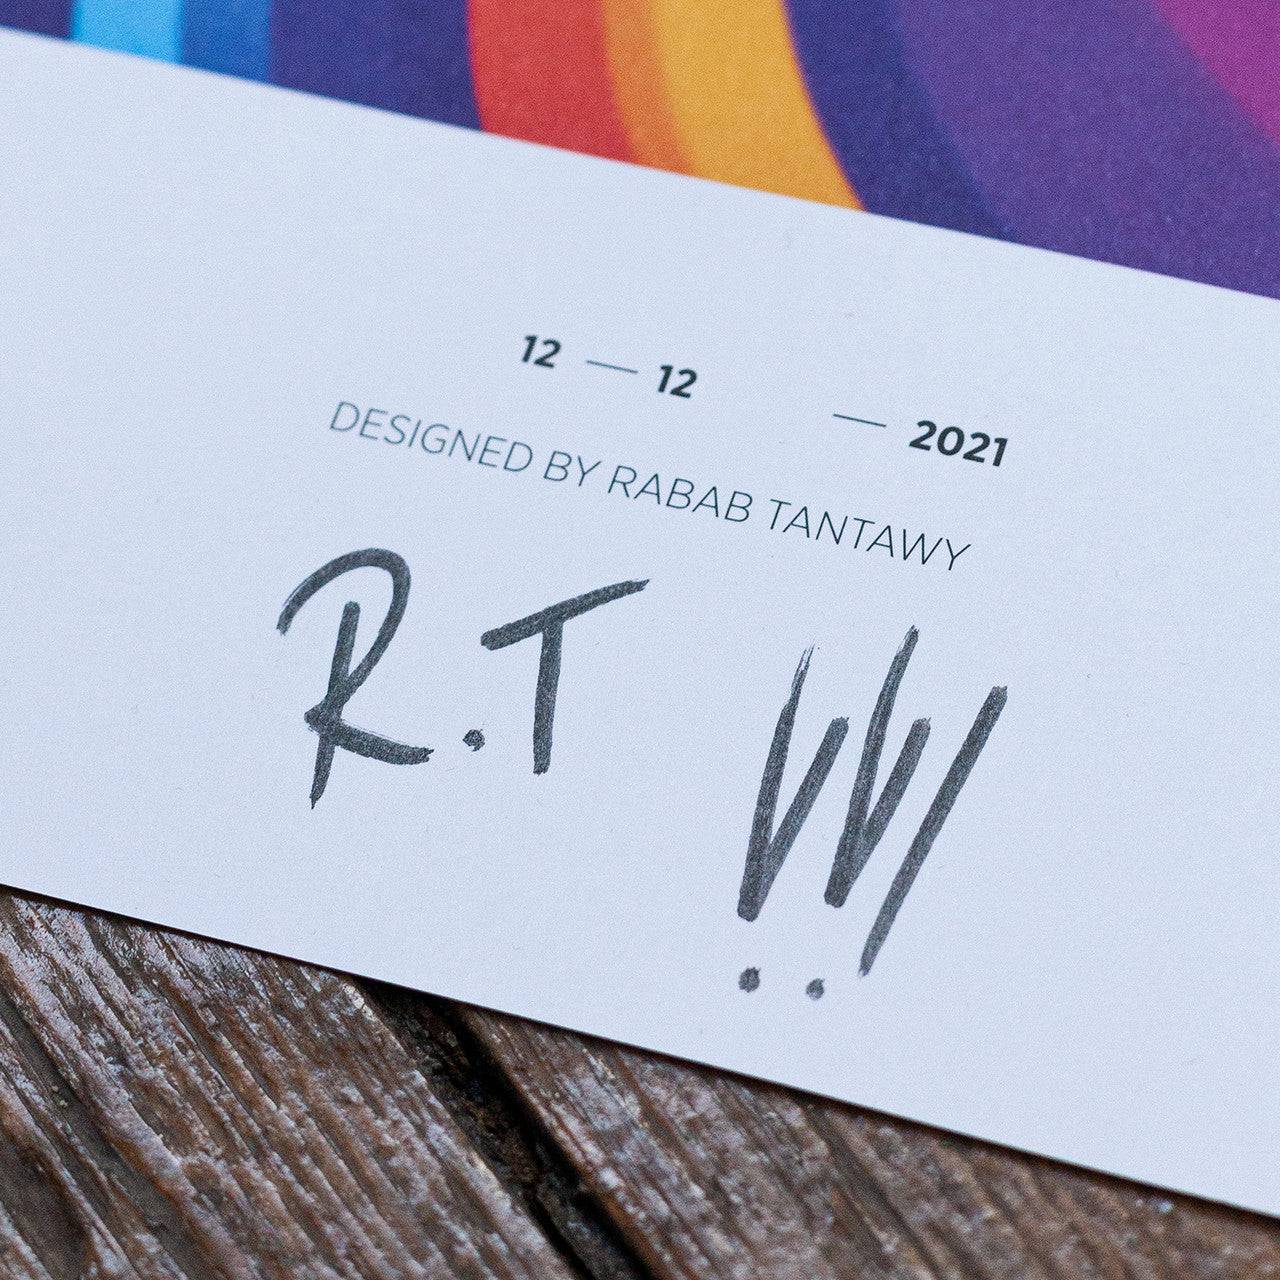 Signed by Rabab Tantawy - McLaren x Vuse - Daniel Ricciardo - Driven by Change - 2021 | Collector's Edition